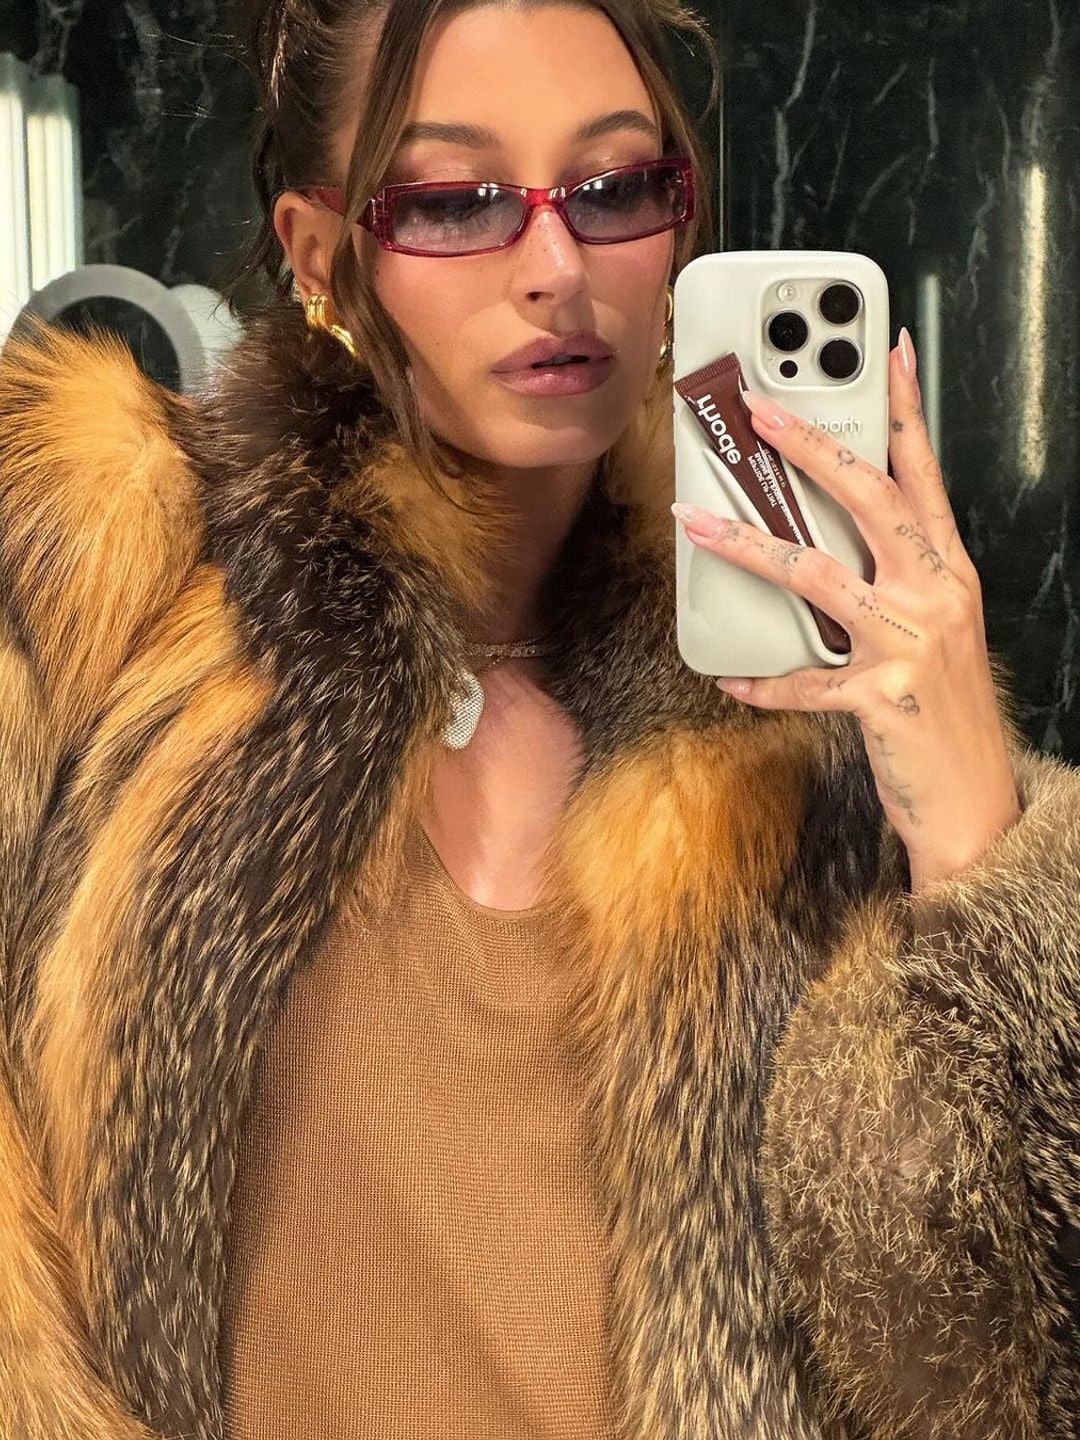 Hailey Bieber wearing a fur coat while taking a mirror selfie with a lip balm-holding phone case